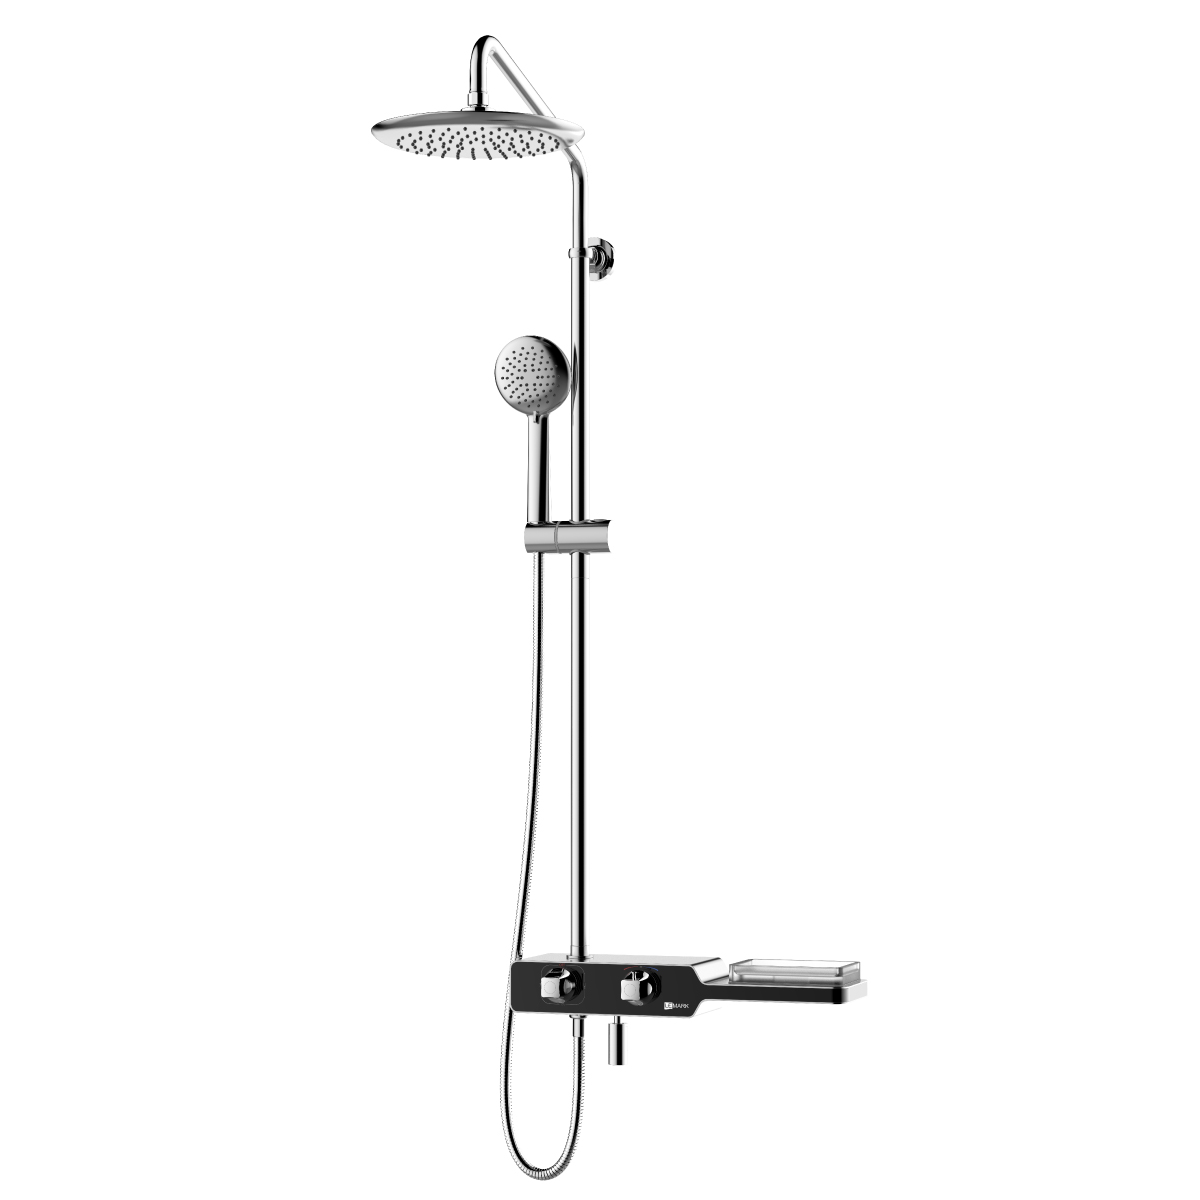 LM7009C Thermostatic bath and shower faucet with adjustable rod height, swivel spout and «Tropical rain» shower head